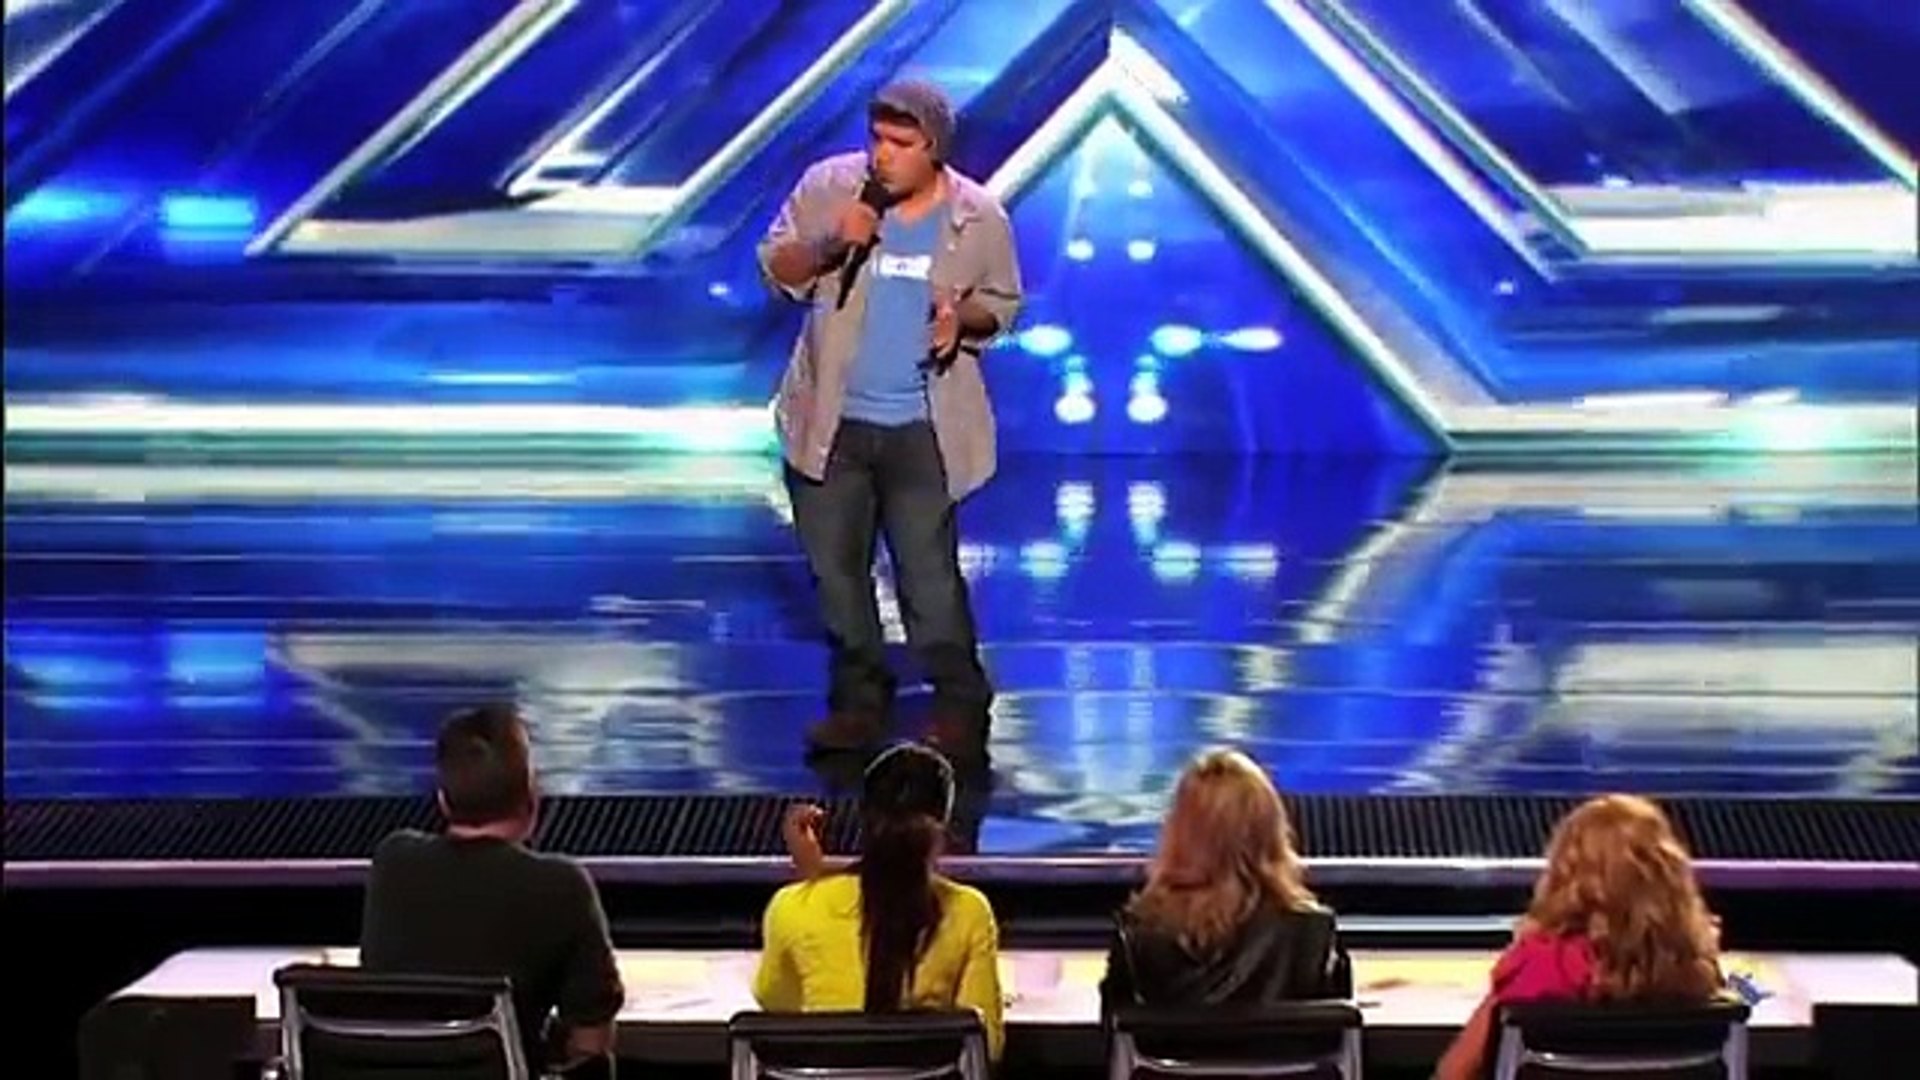 The X Factor The Best Auditions Part 2 !!